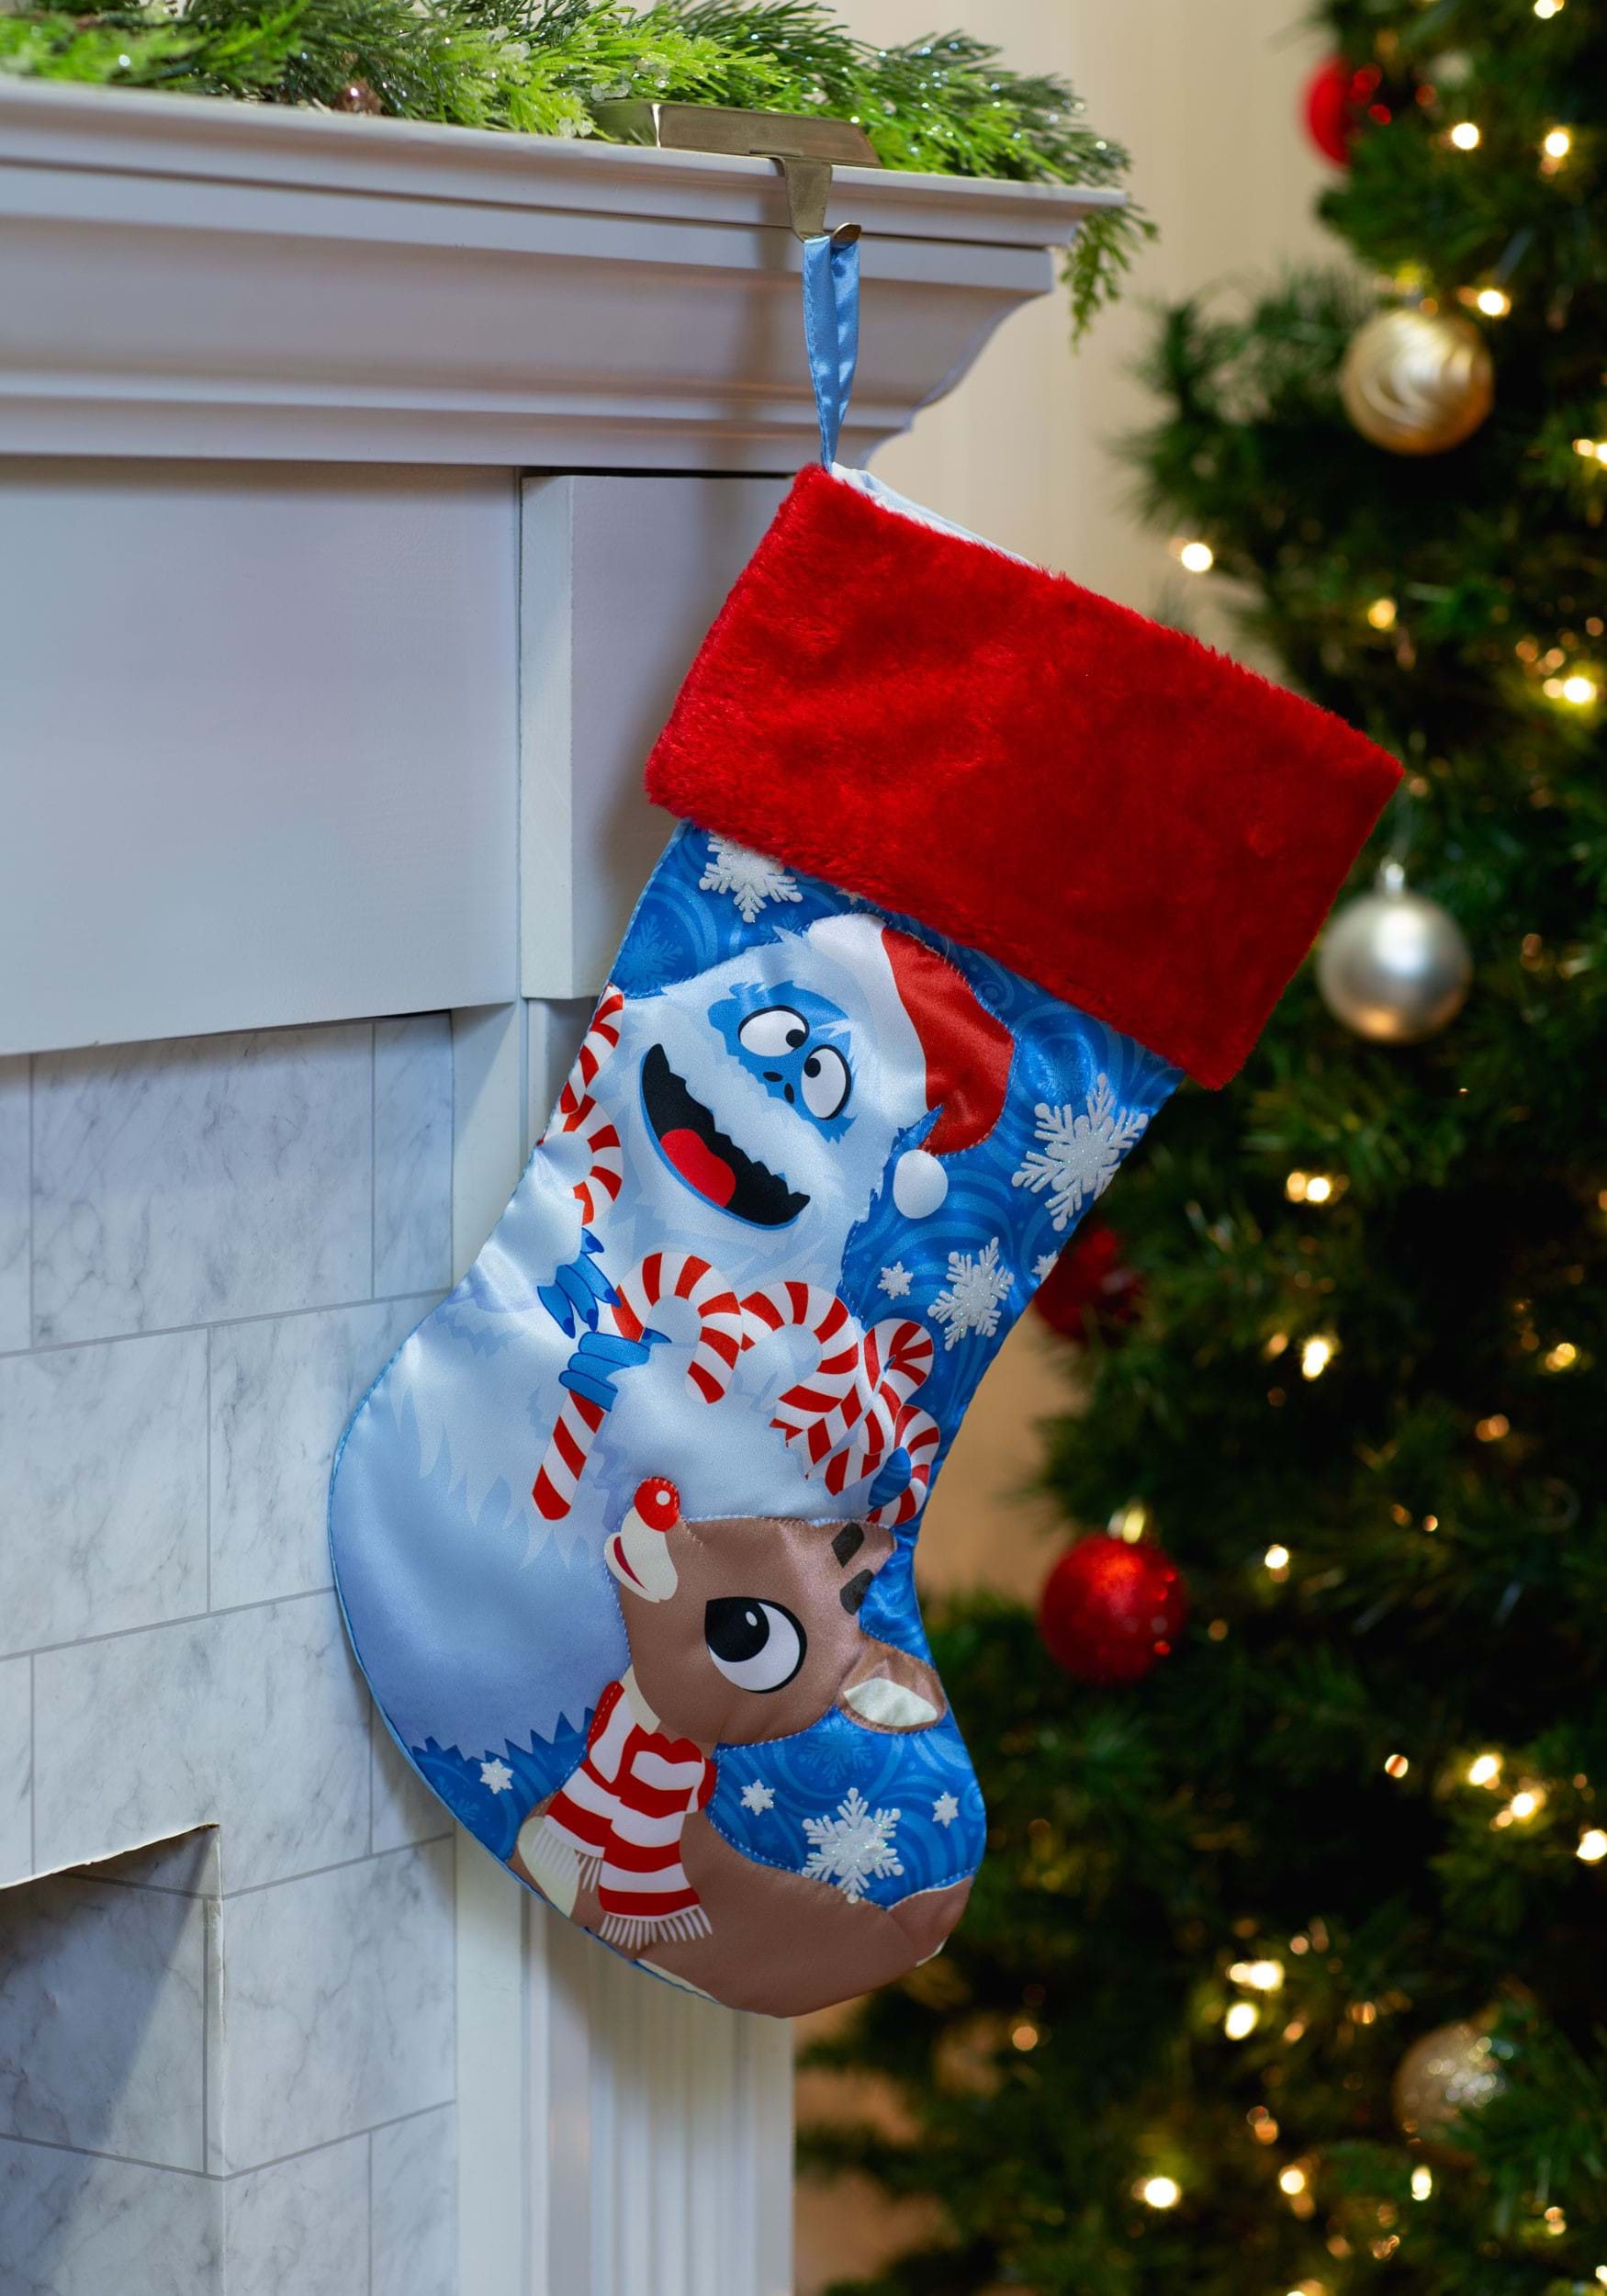 Rudolph the Red-Nosed Reindeer Bumble 19-Inch Printed Stocking